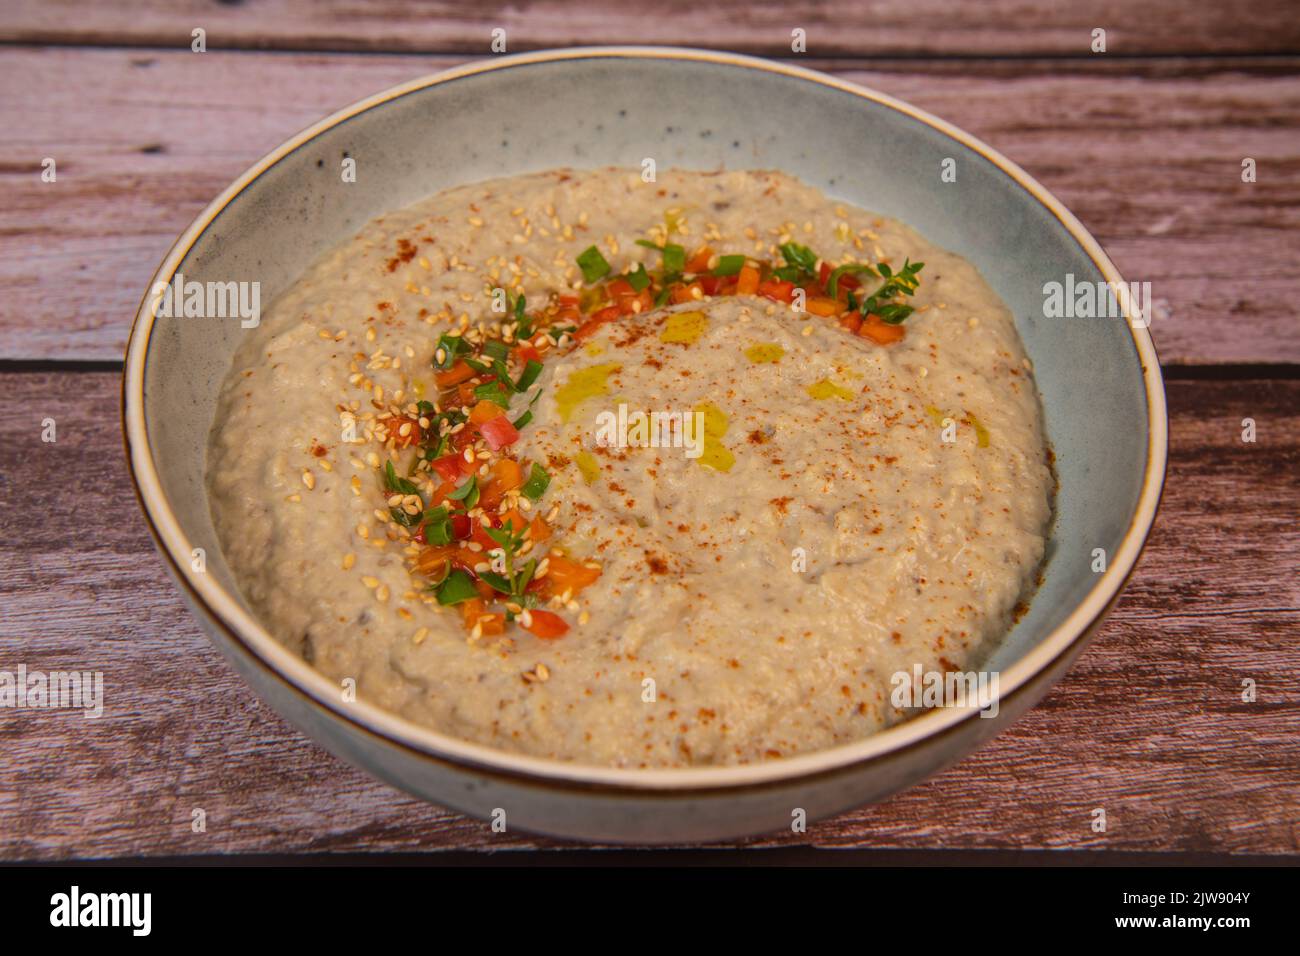 Traditional arabian eggplant dip baba ganoush with herbs and smoked paprika on a wooden background Stock Photo